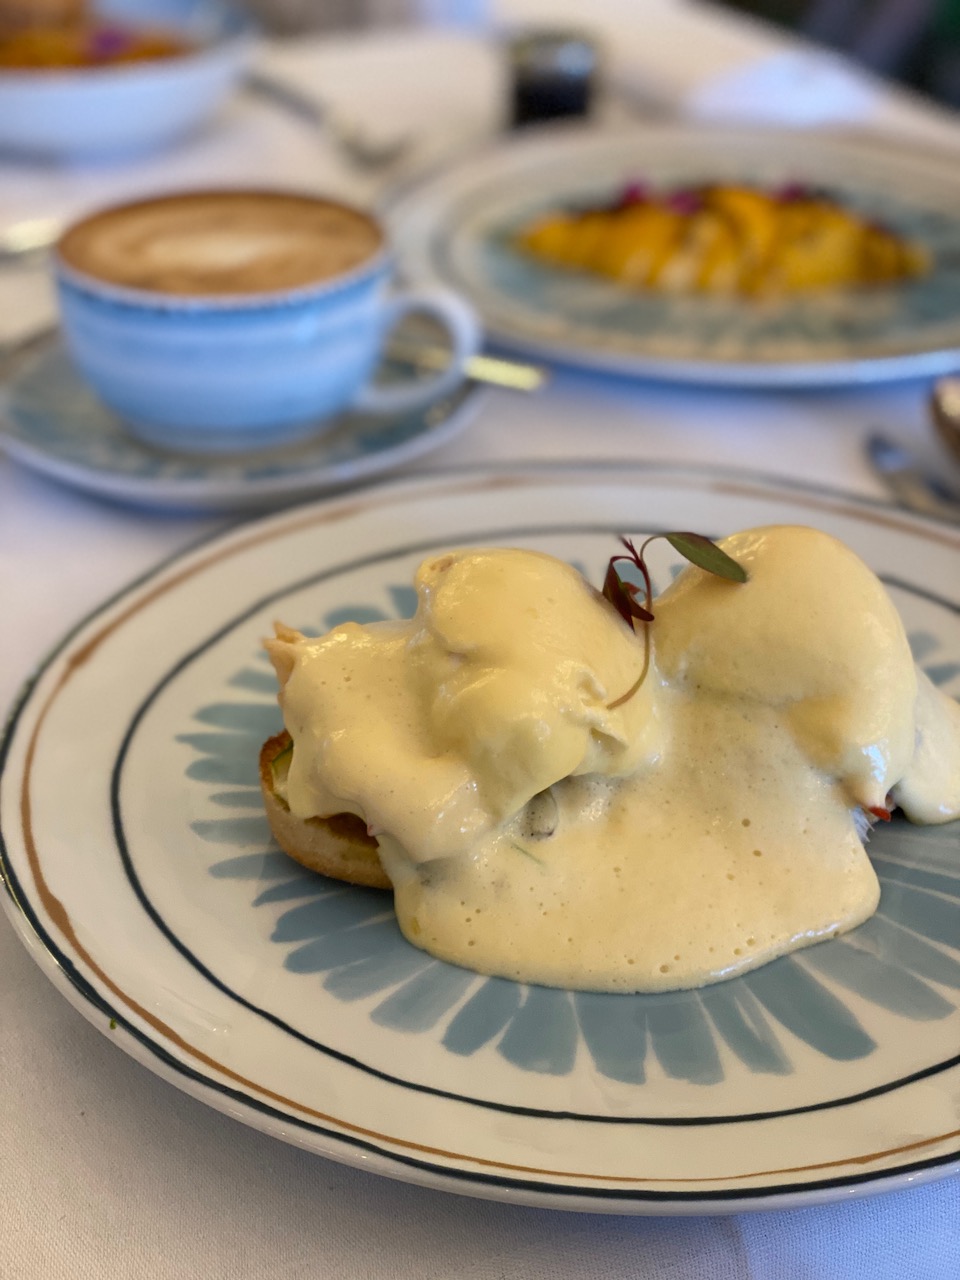 Eggs benedict with a delightfully light foaming hollandaise